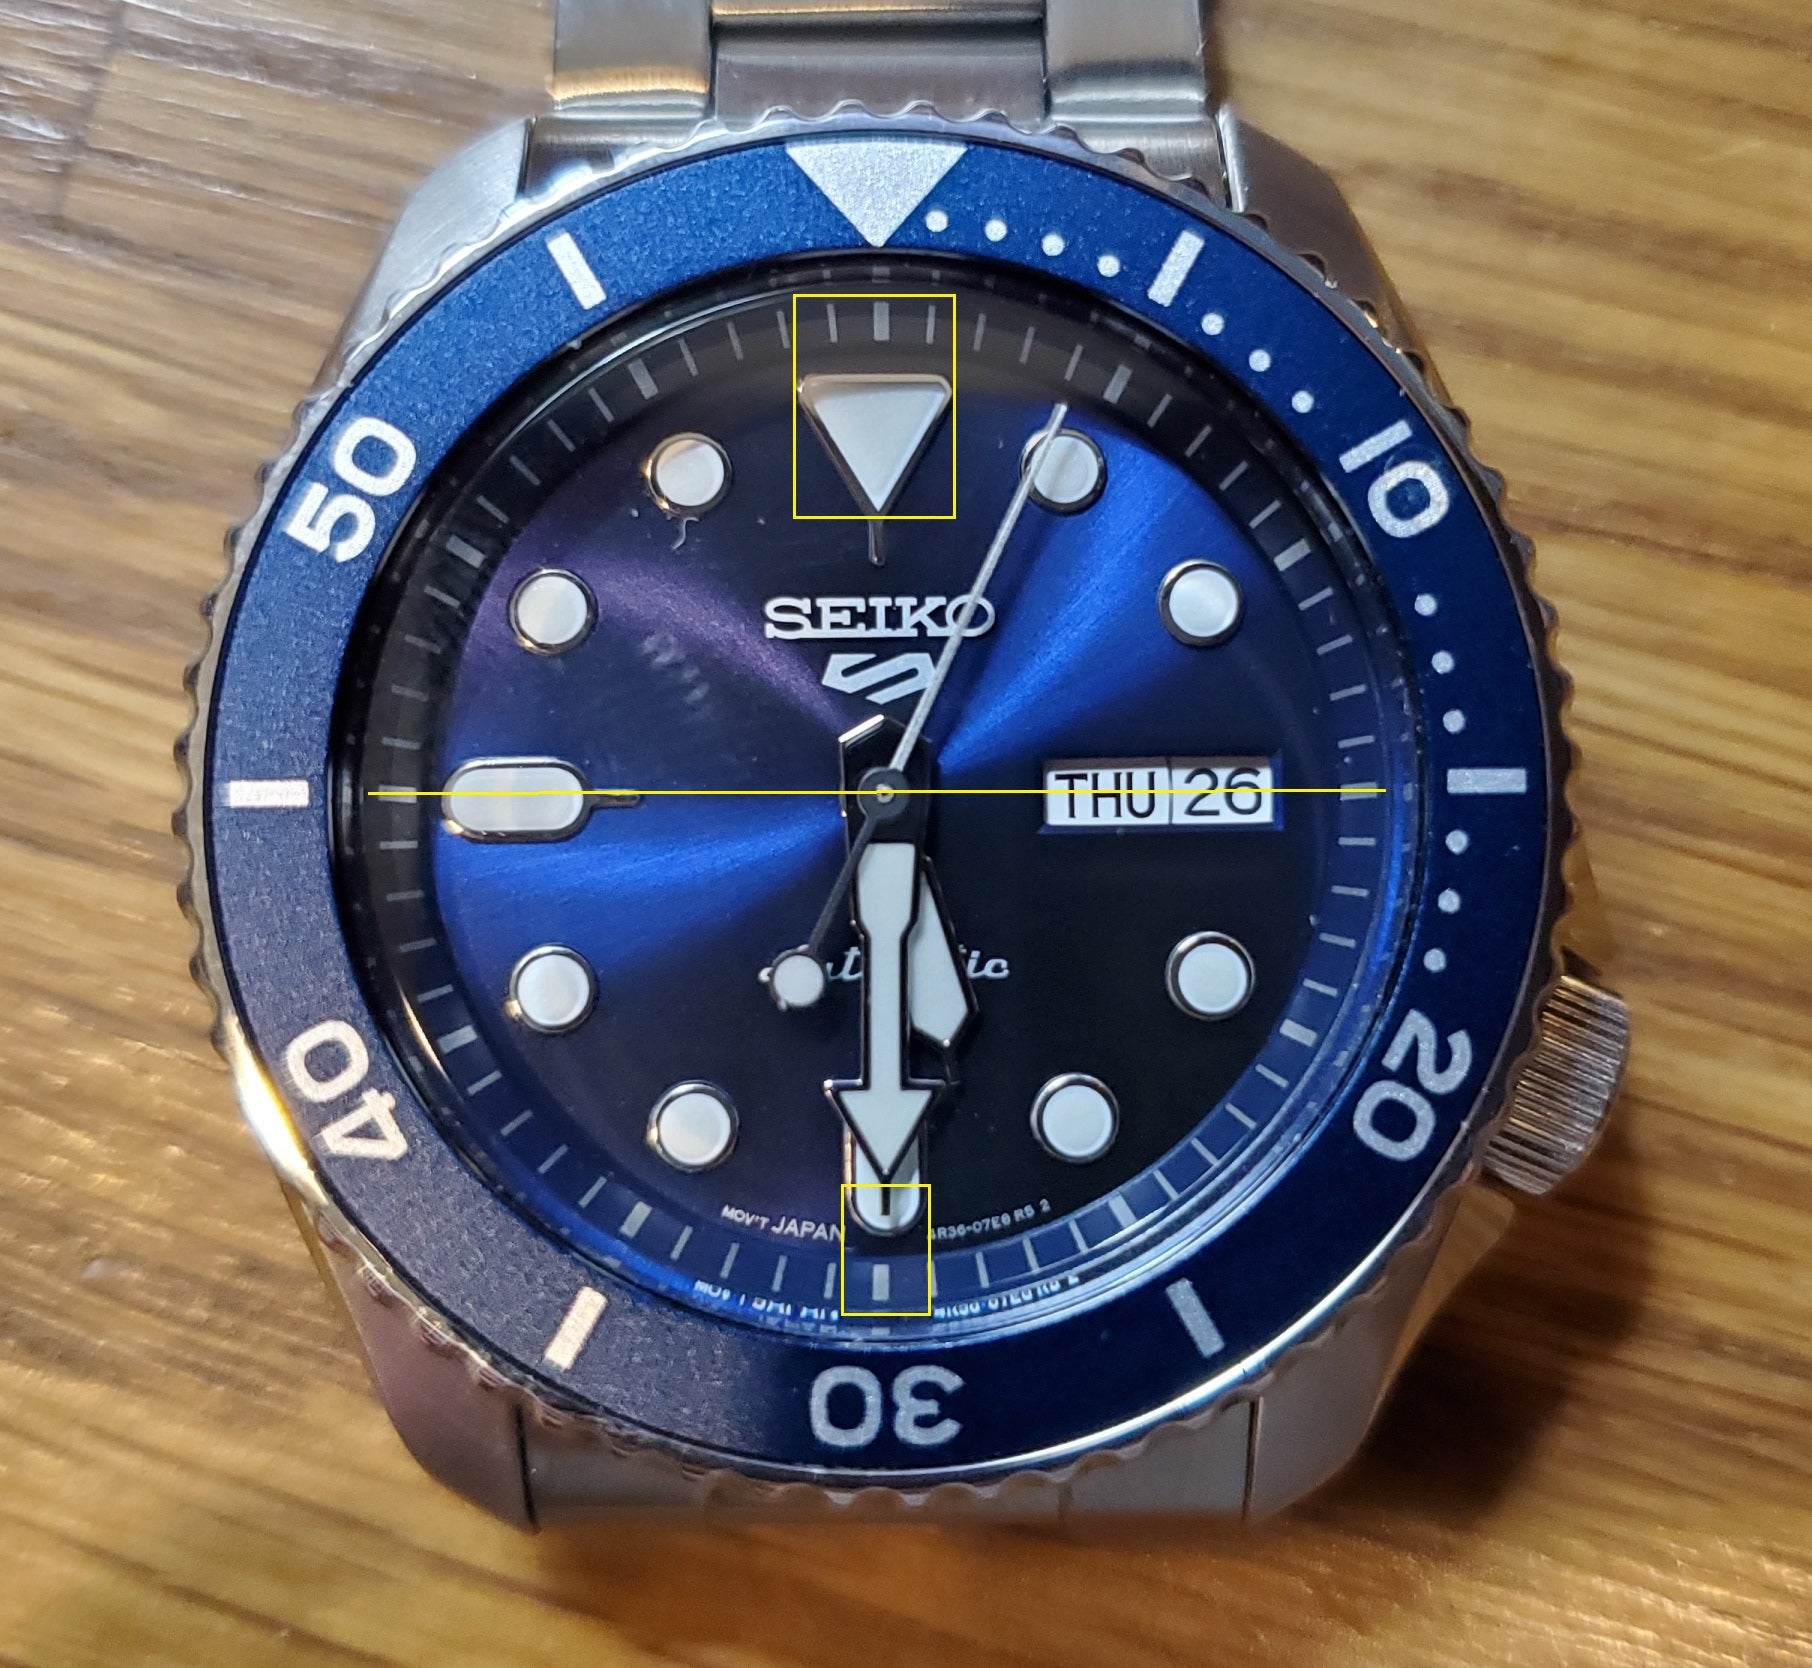 Seiko and off misaligned dials | WatchUSeek Watch Forums